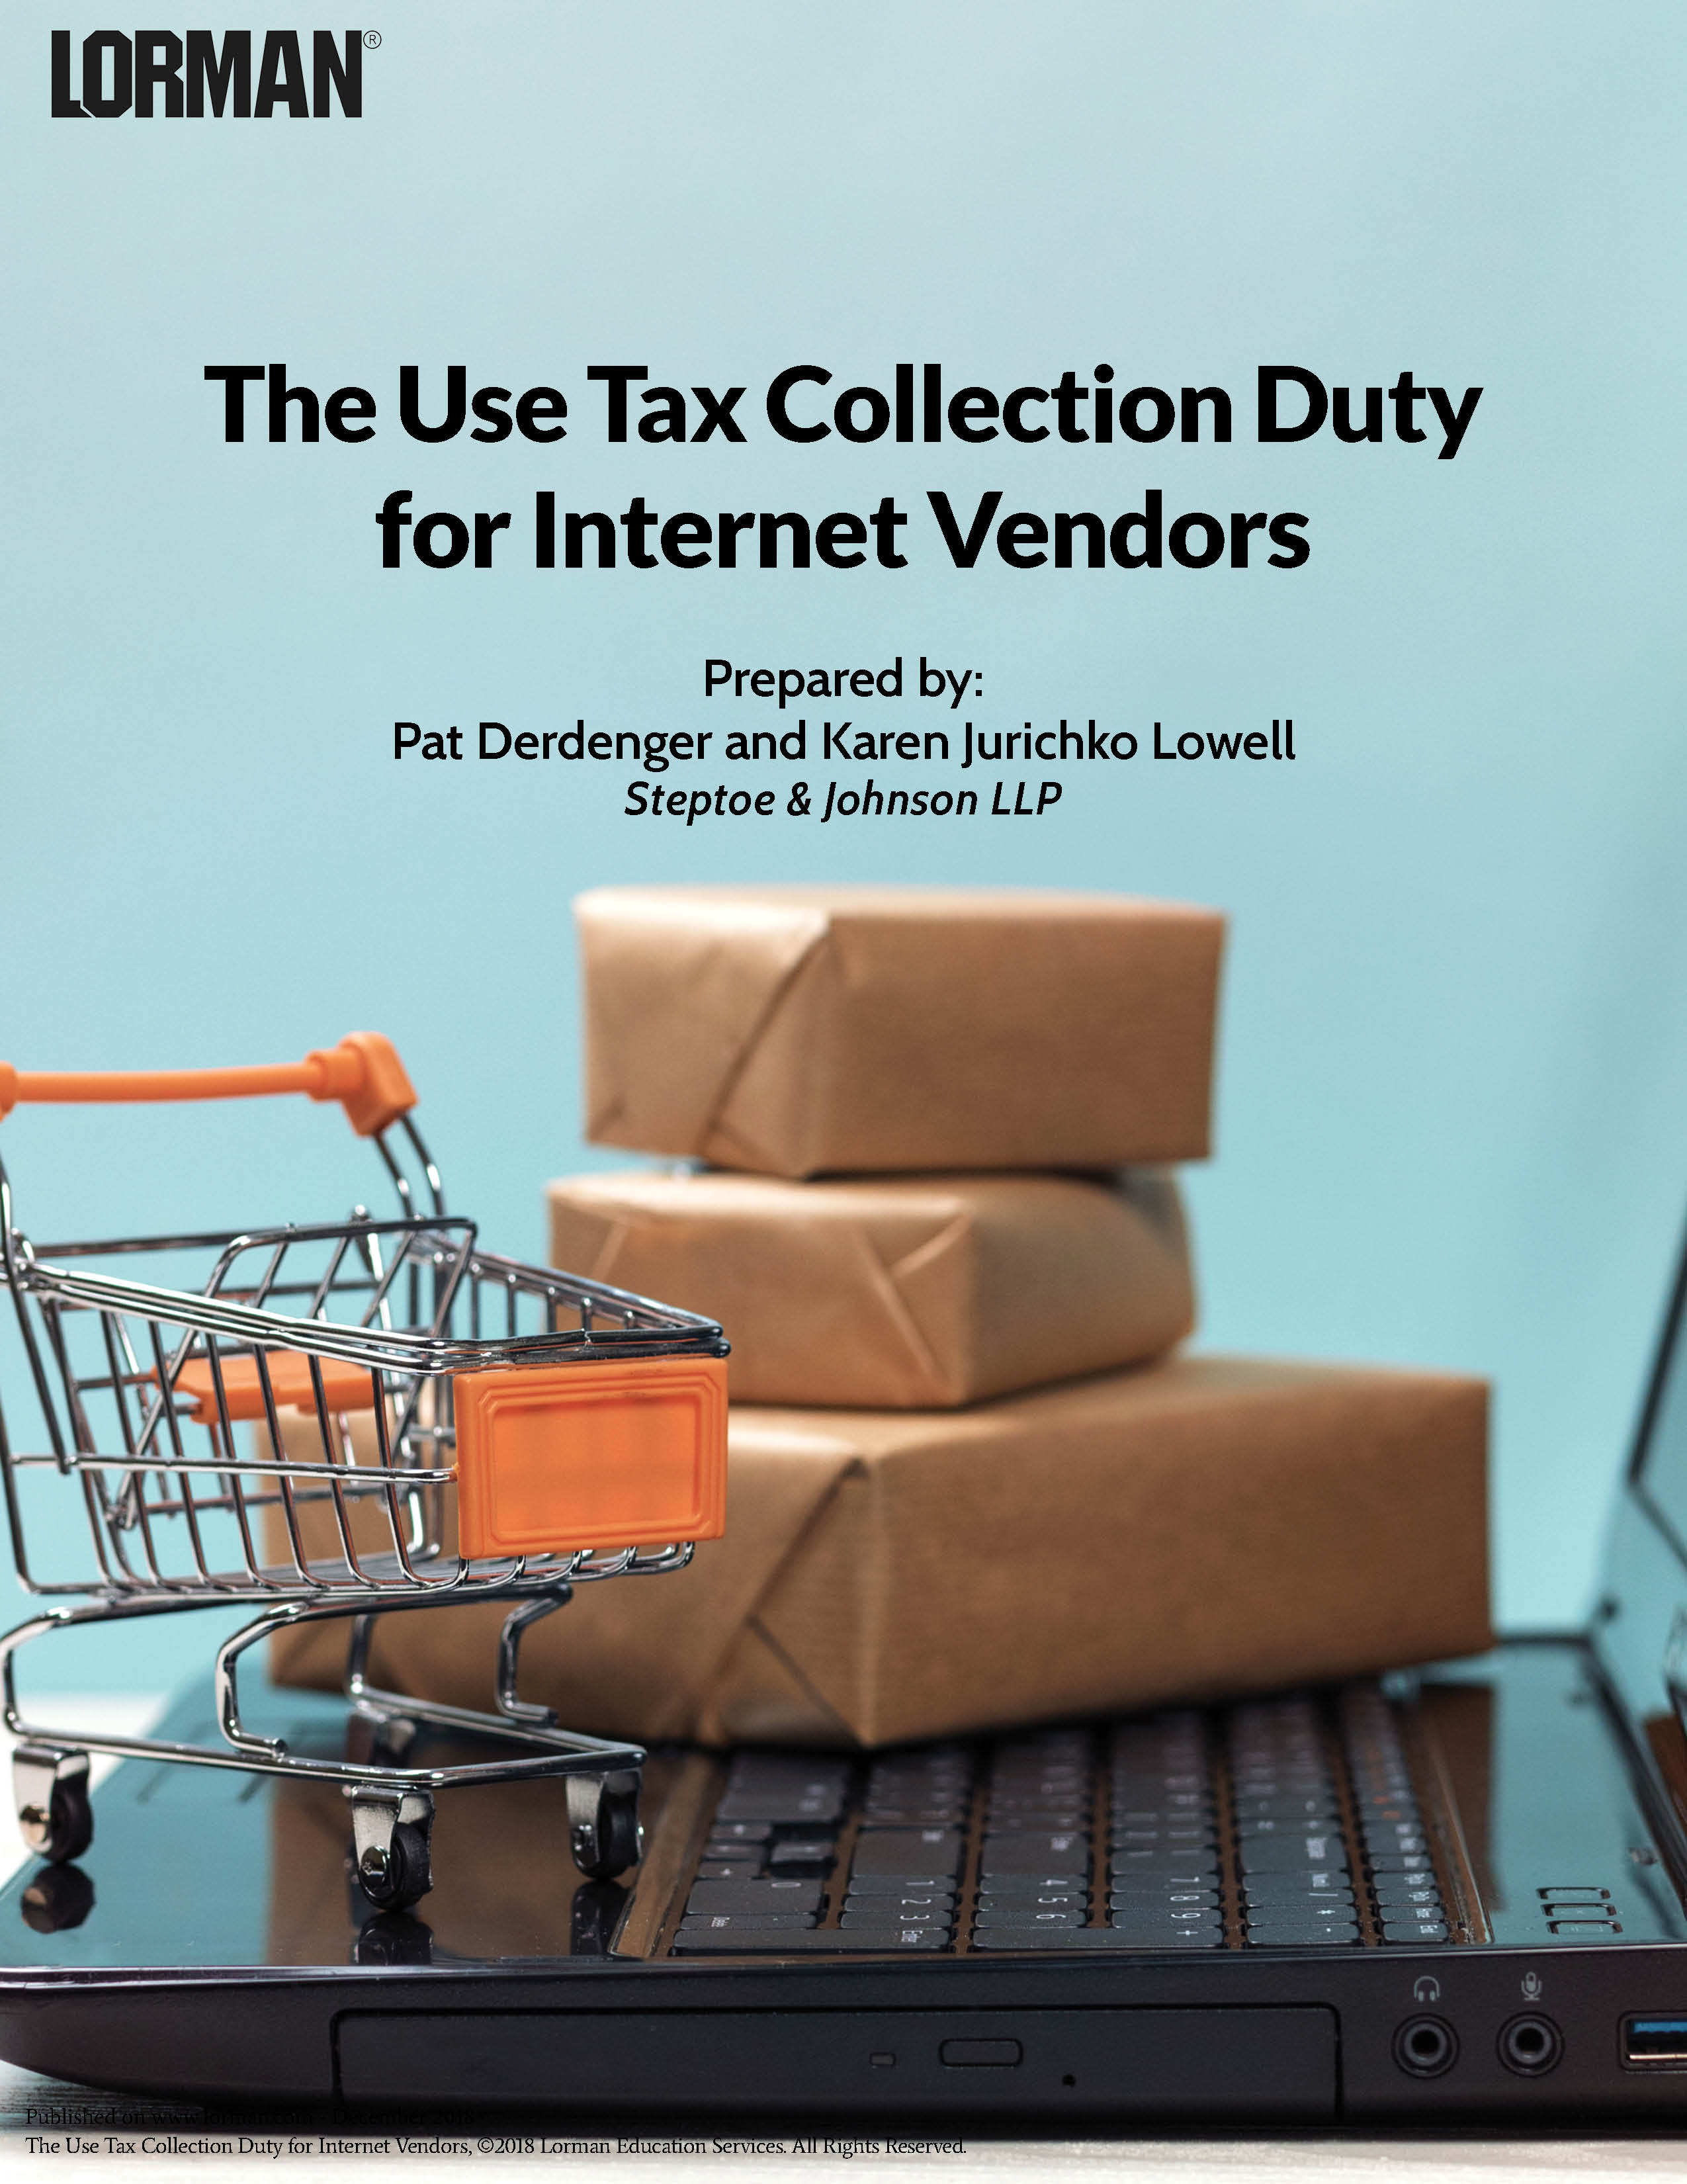 The Use Tax Collection Duty for Internet Vendors